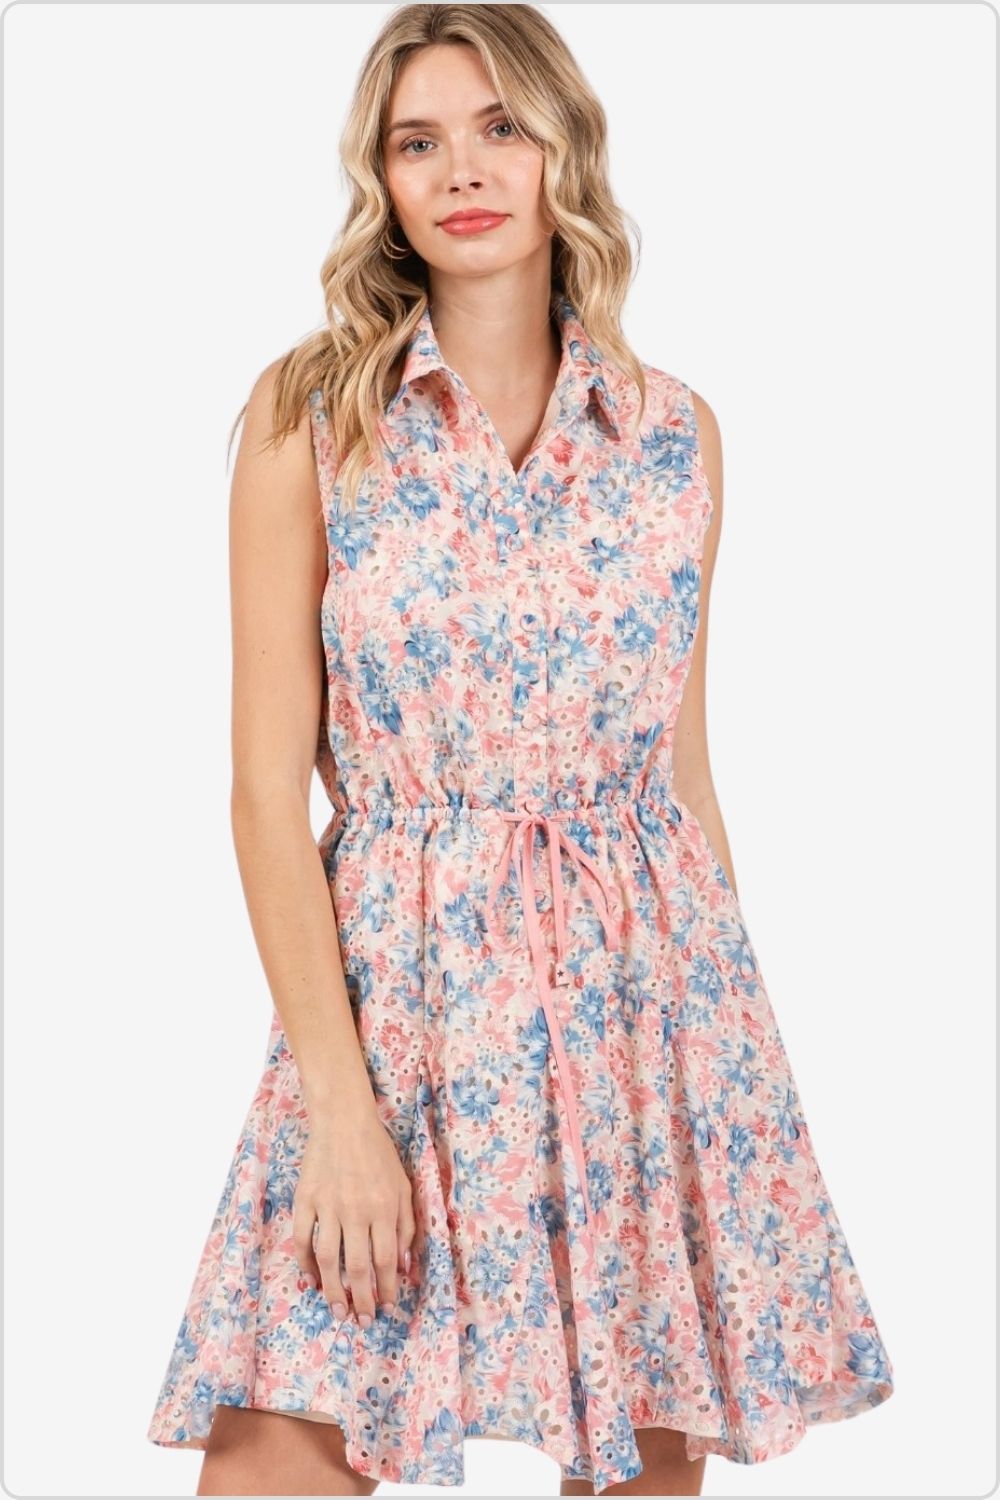 Woman in pink and blue floral sleeveless mini dress.